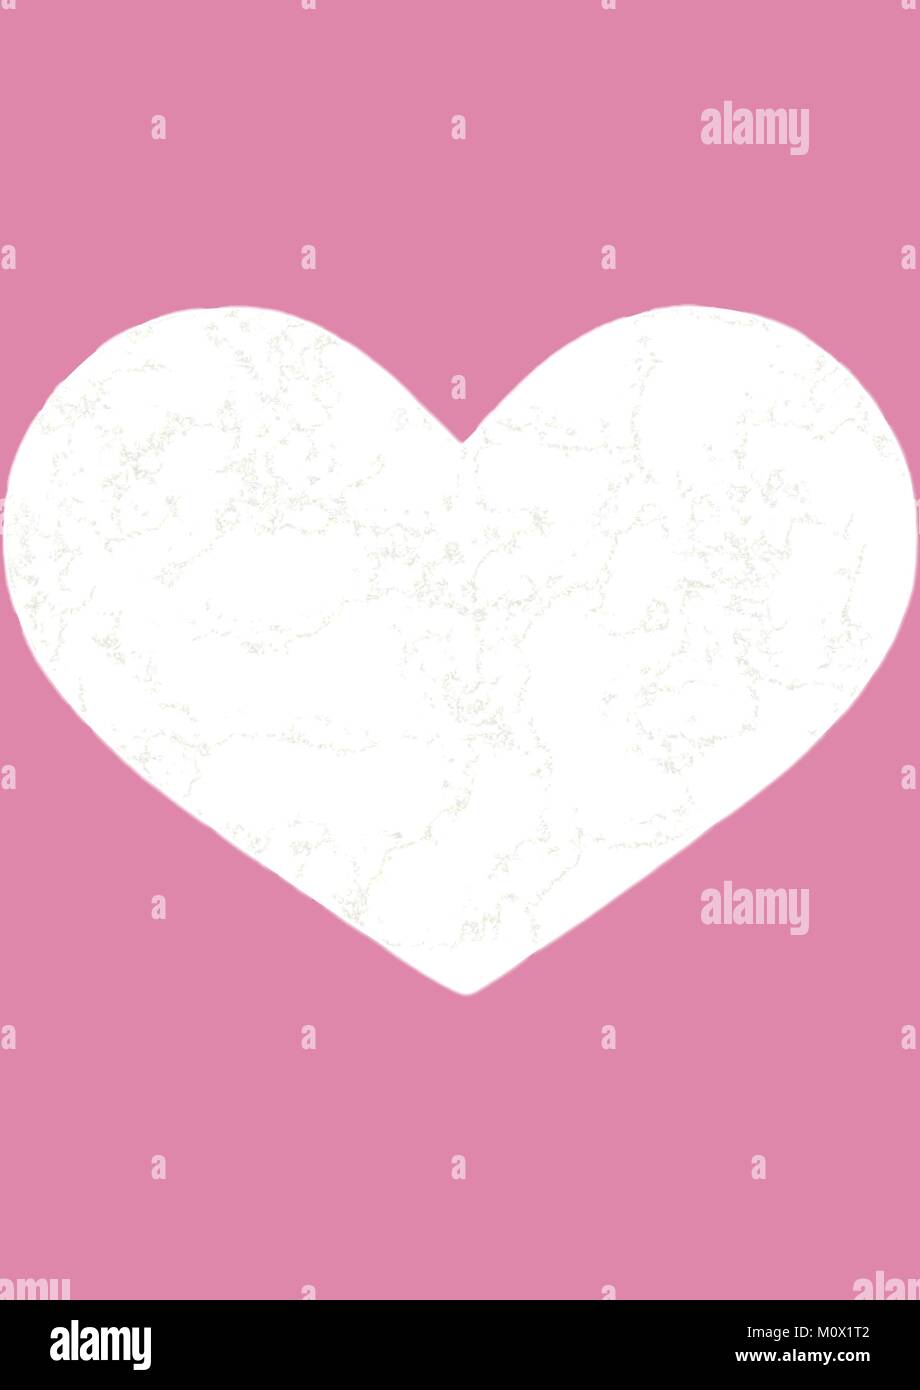 White Textured Heart On A Light Pink Background Stock Vector